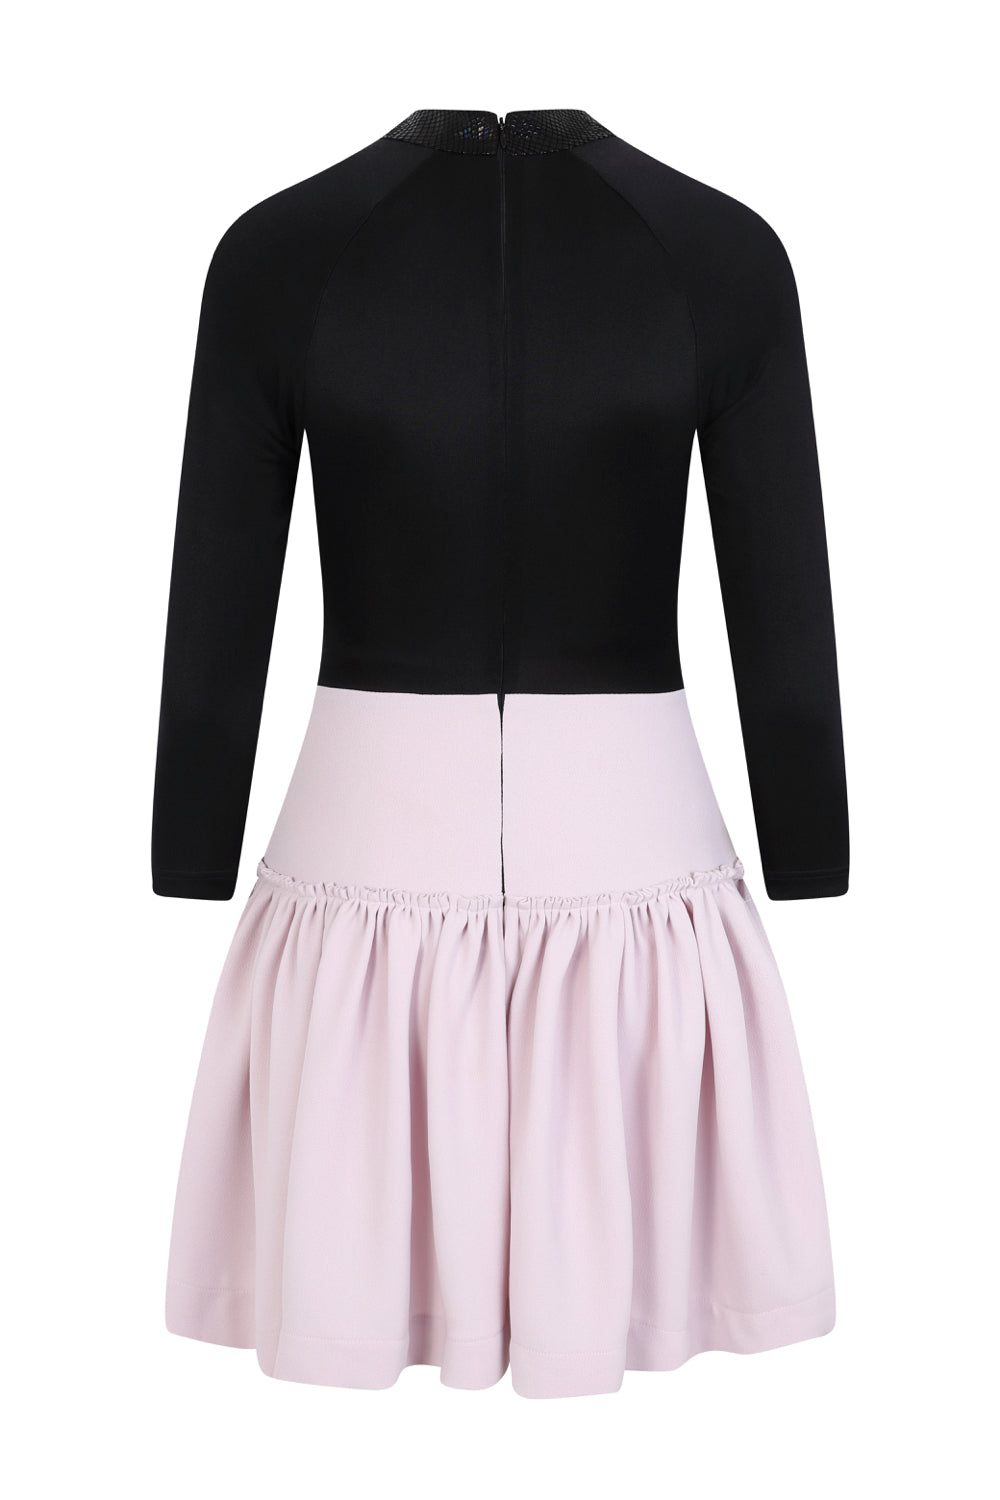 pink frill dress with black trims